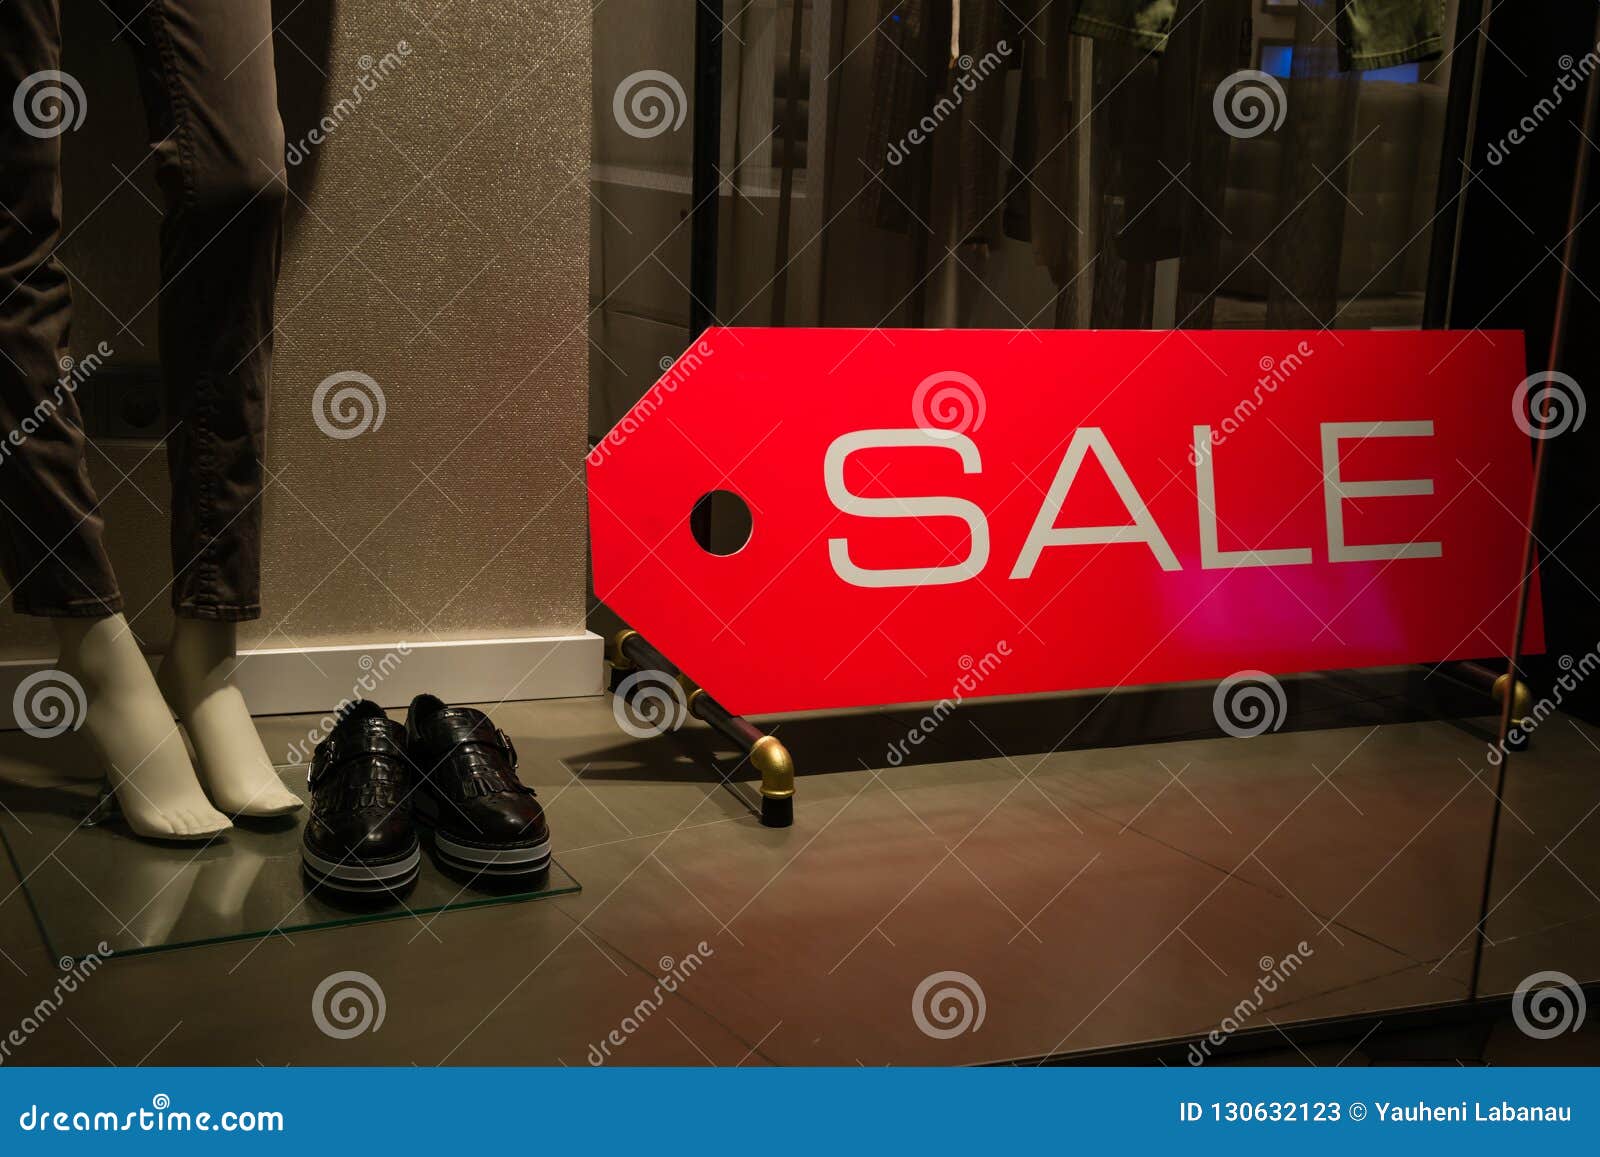 Sales Concept, Signboard Sale On A Shop Window Stock Image - Image of ...